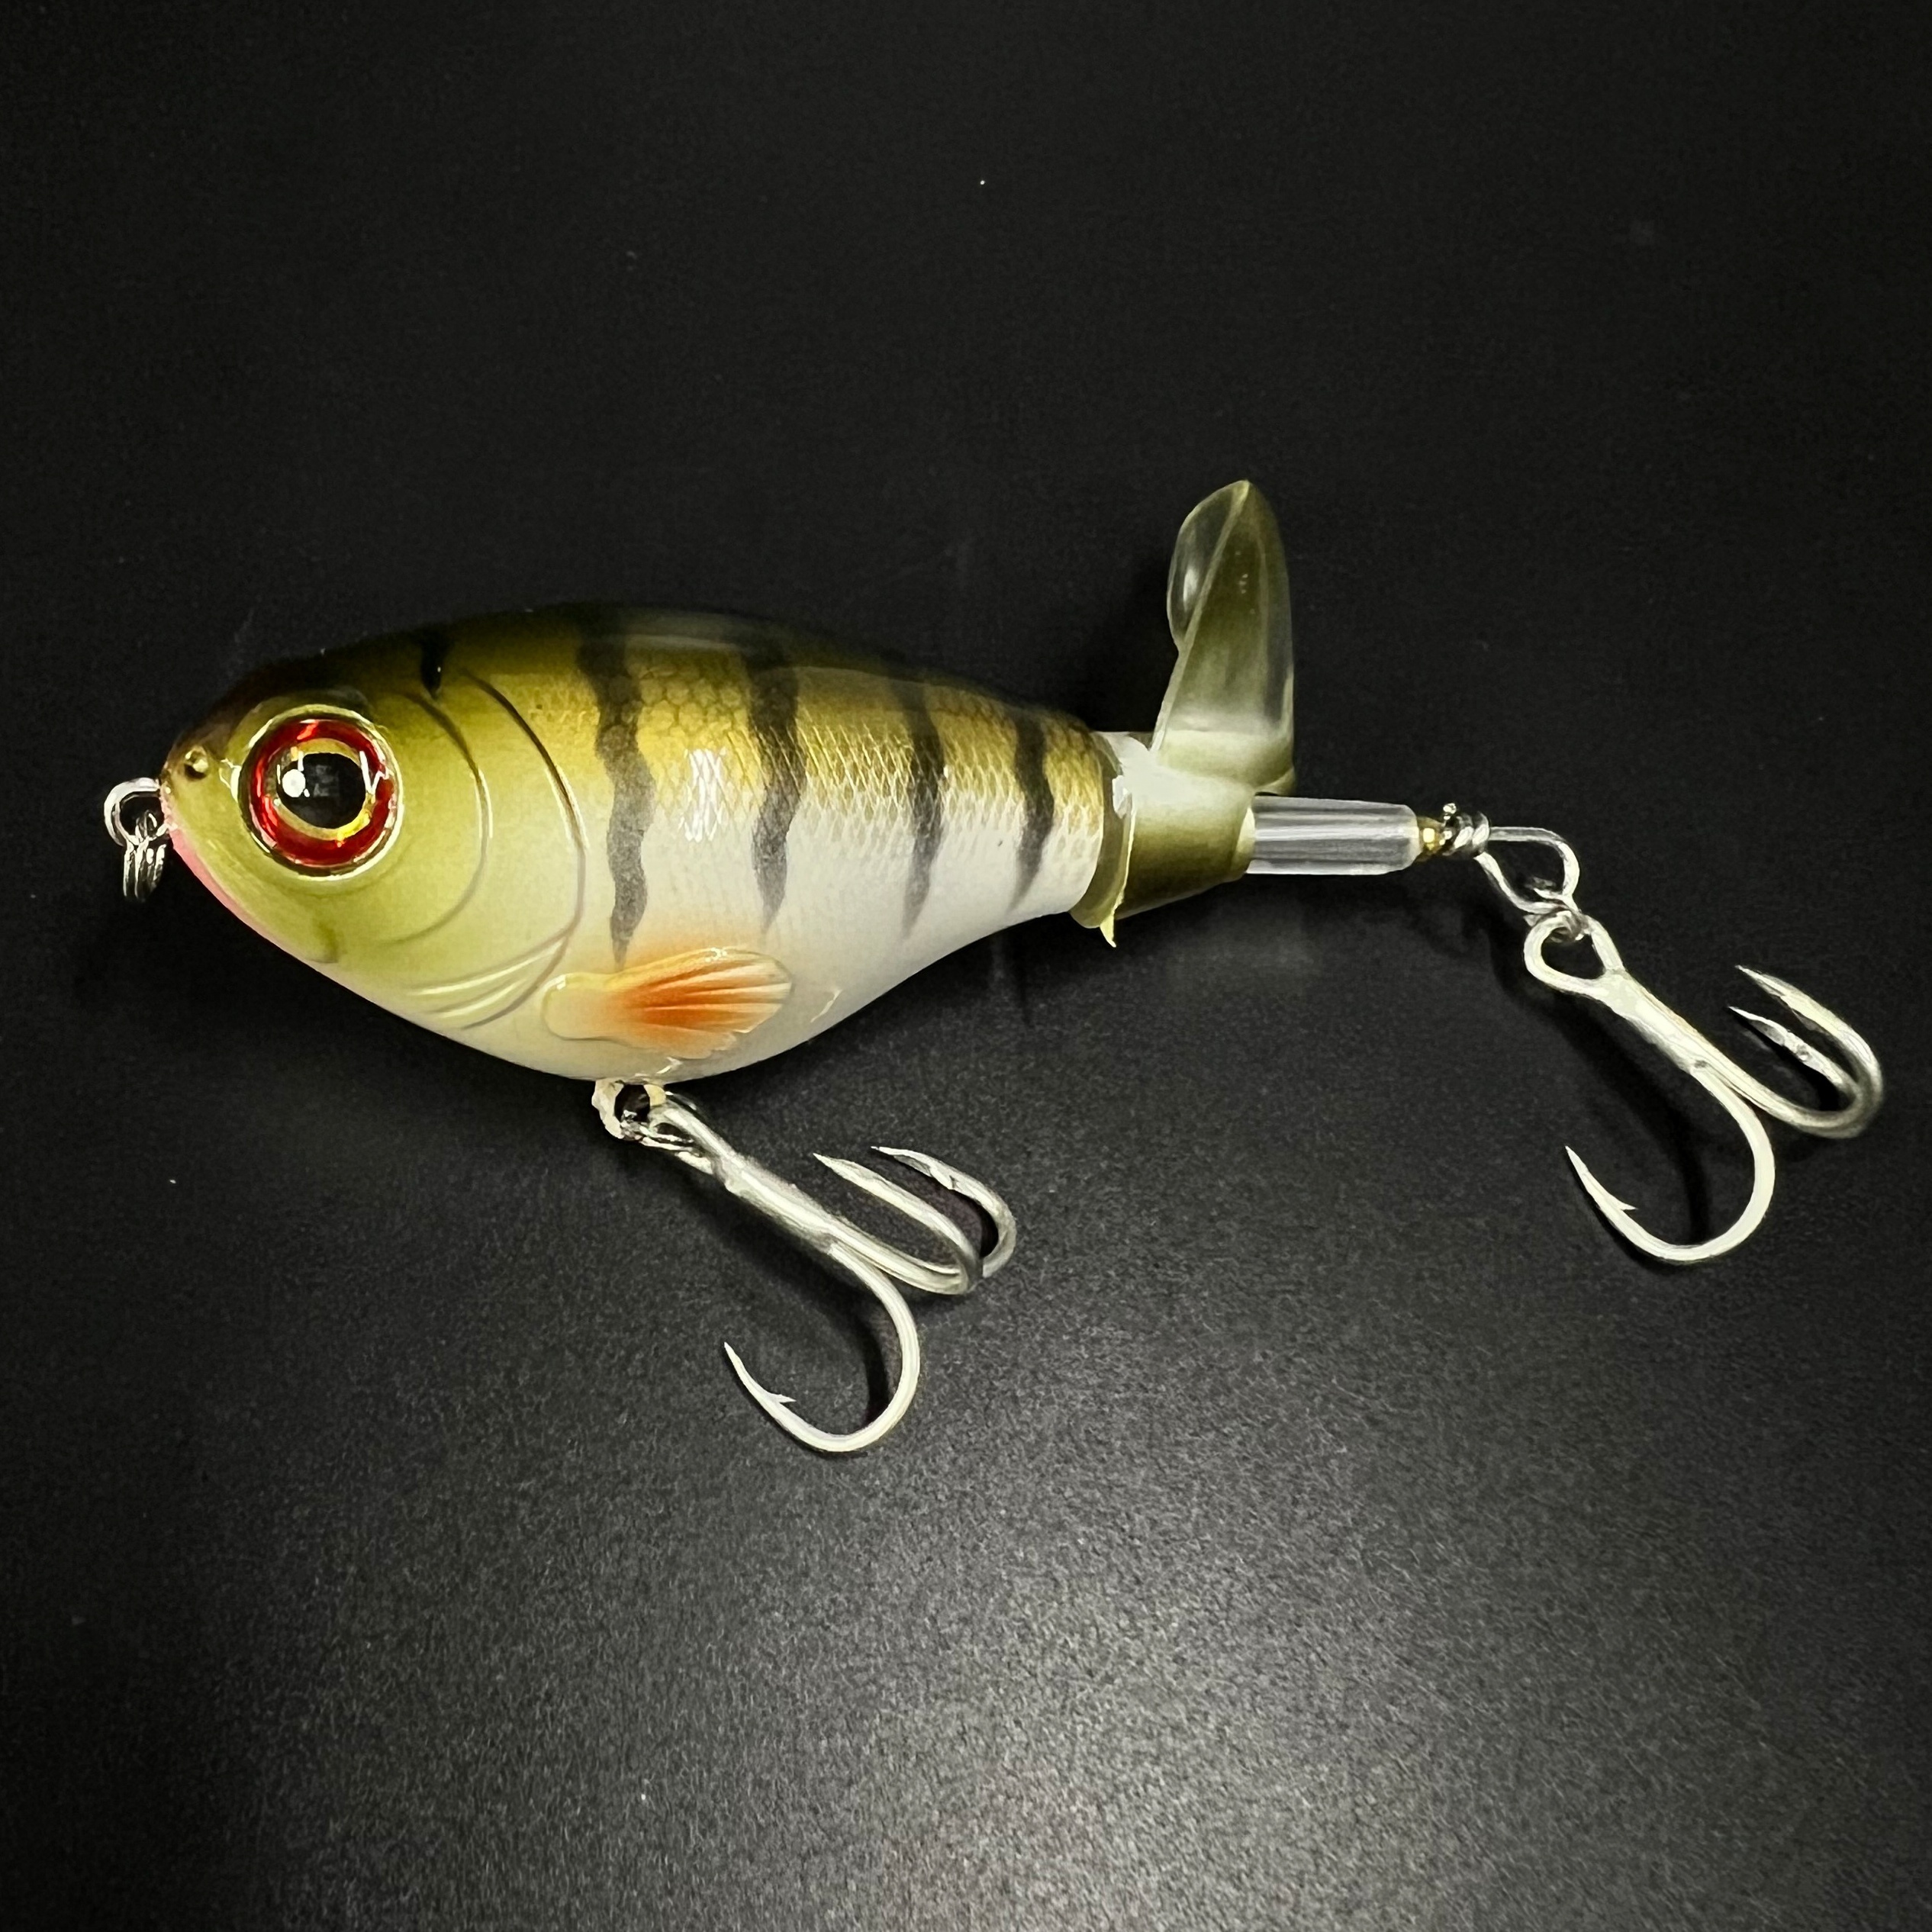 TRUSCEND Floating Fishing Lures with BKK Hooks, Pencil Plopper Fishing Lures  for Bass Catfish Pike Perch, Top Water Bass Bait Lure with Propeller Tail,  Pencil Topwater Lure Freshwater or Saltwater, Floating Lures 